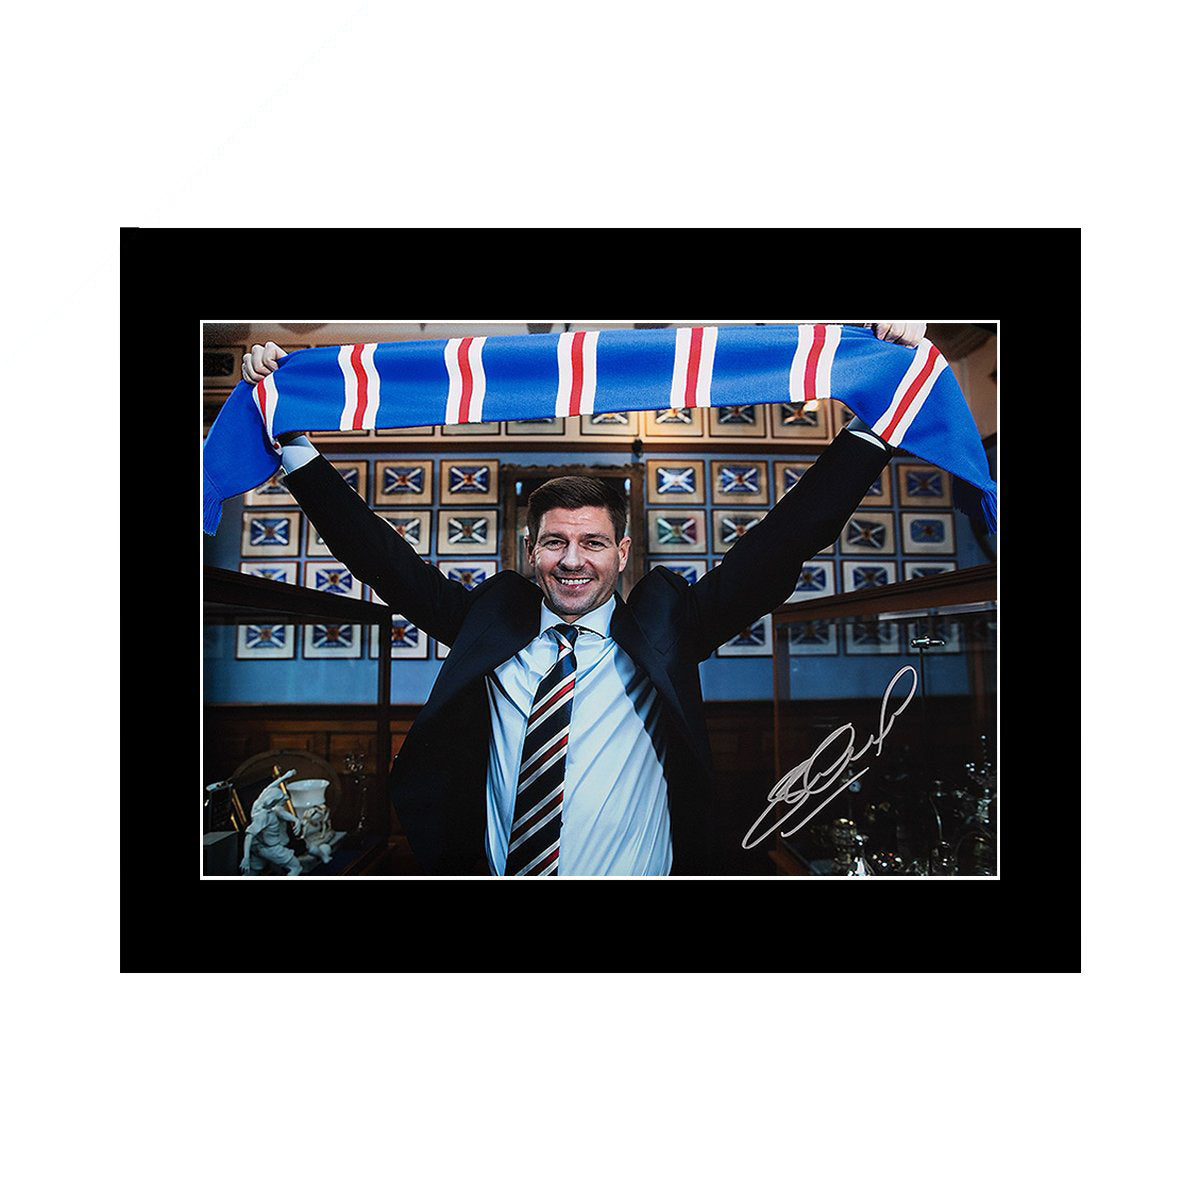 Steven Gerrard Signed Rangers Photo: 'Let's Go' Mounted Image - The Bootroom Collection